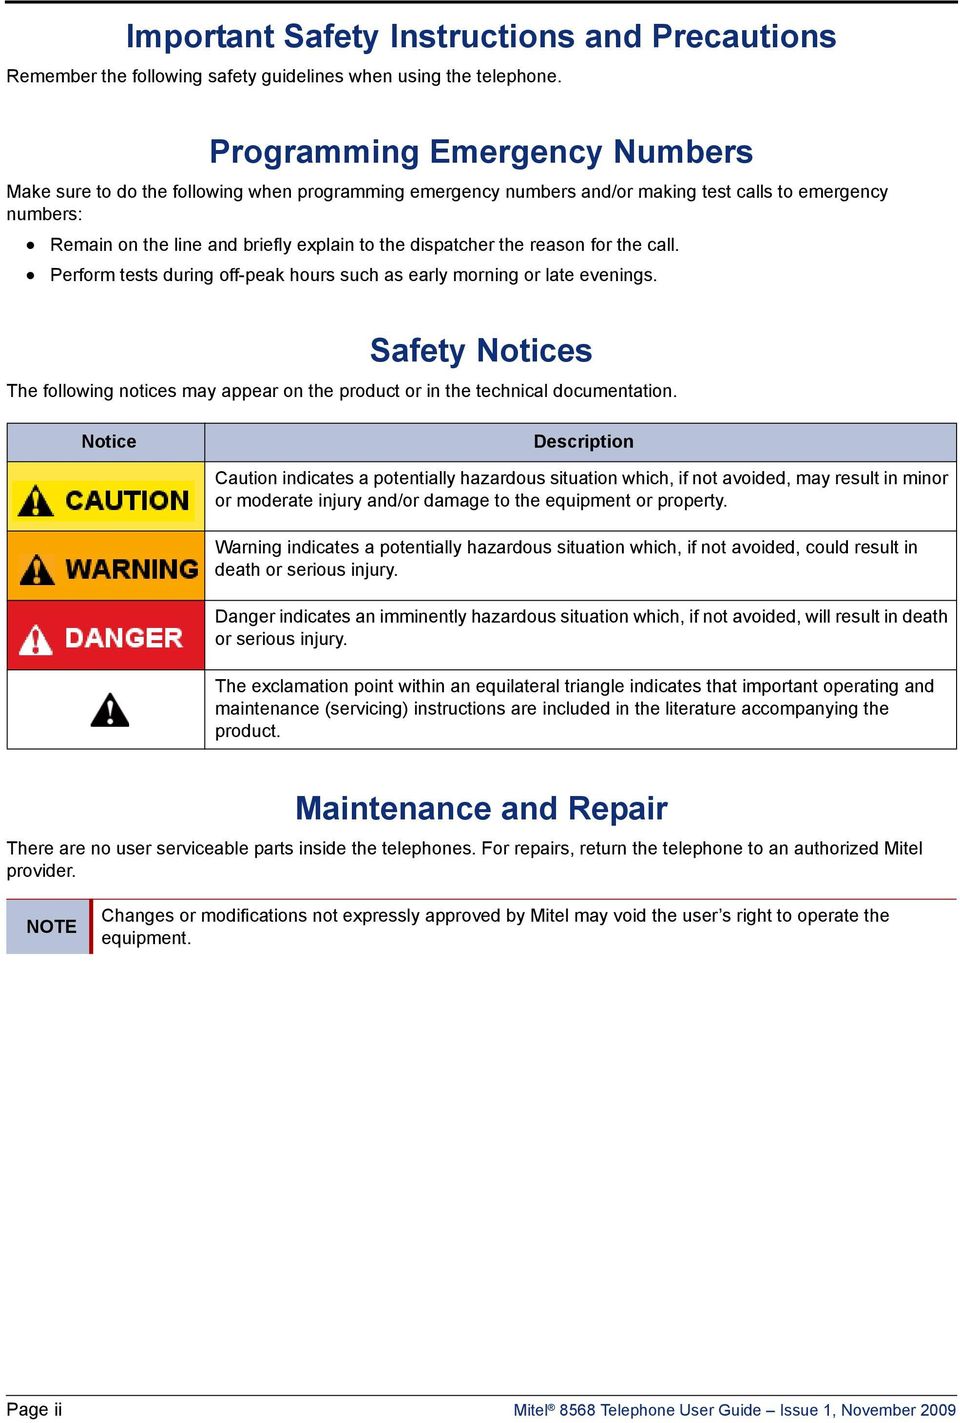 the reason for the call. Perform tests during off-peak hours such as early morning or late evenings. Safety Notices The following notices may appear on the product or in the technical documentation.